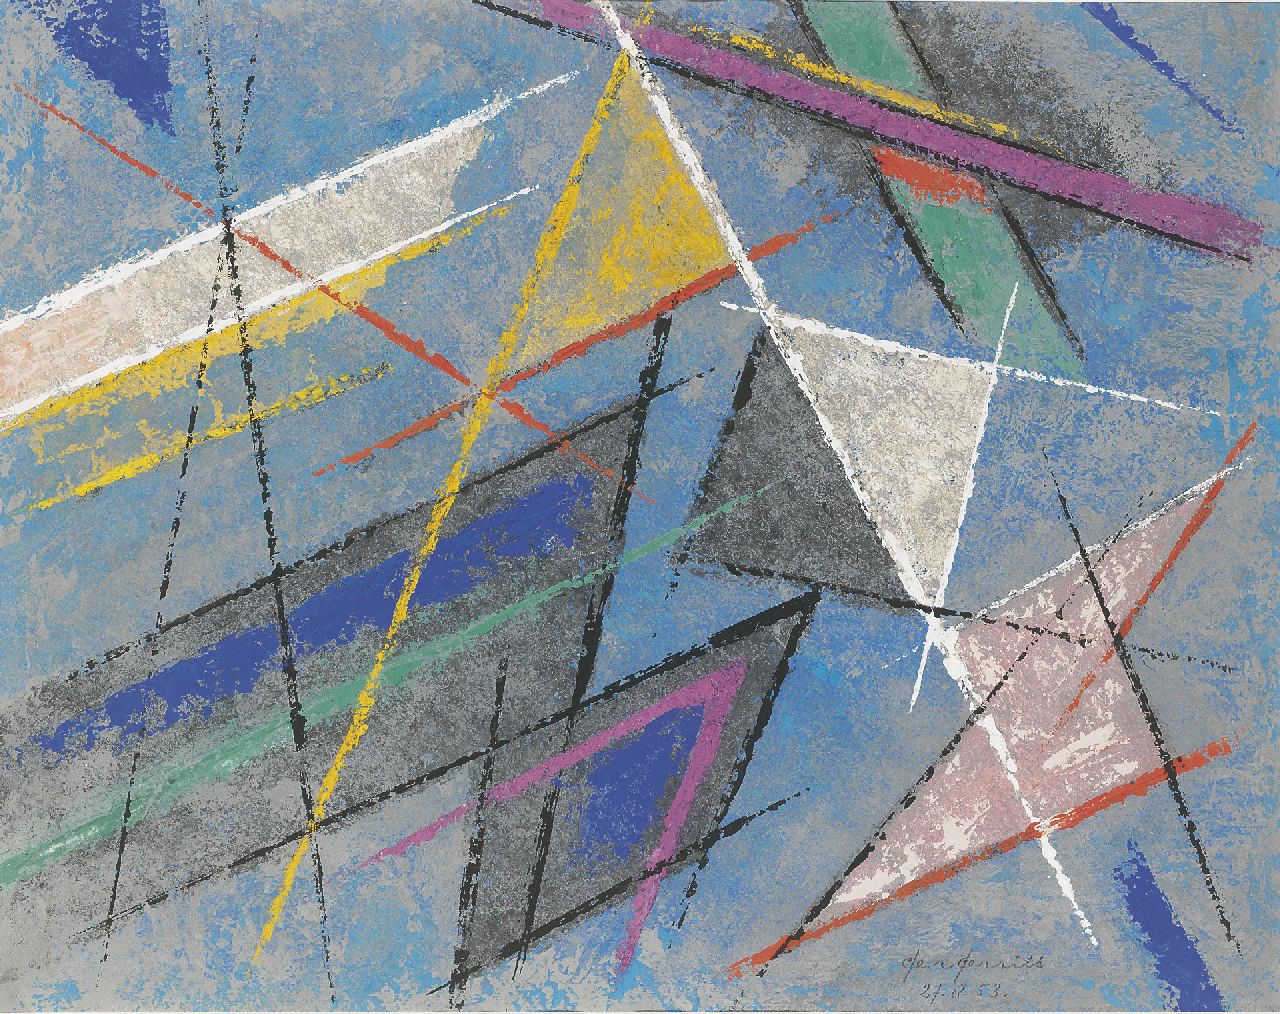 Gerrits G.J.  | Gerrit Jacobus 'Ger' Gerrits | Watercolours and drawings offered for sale | Composition with triangles, pastel and gouache on paper 42.0 x 53.0 cm, signed l.r. and dated 27-8-53